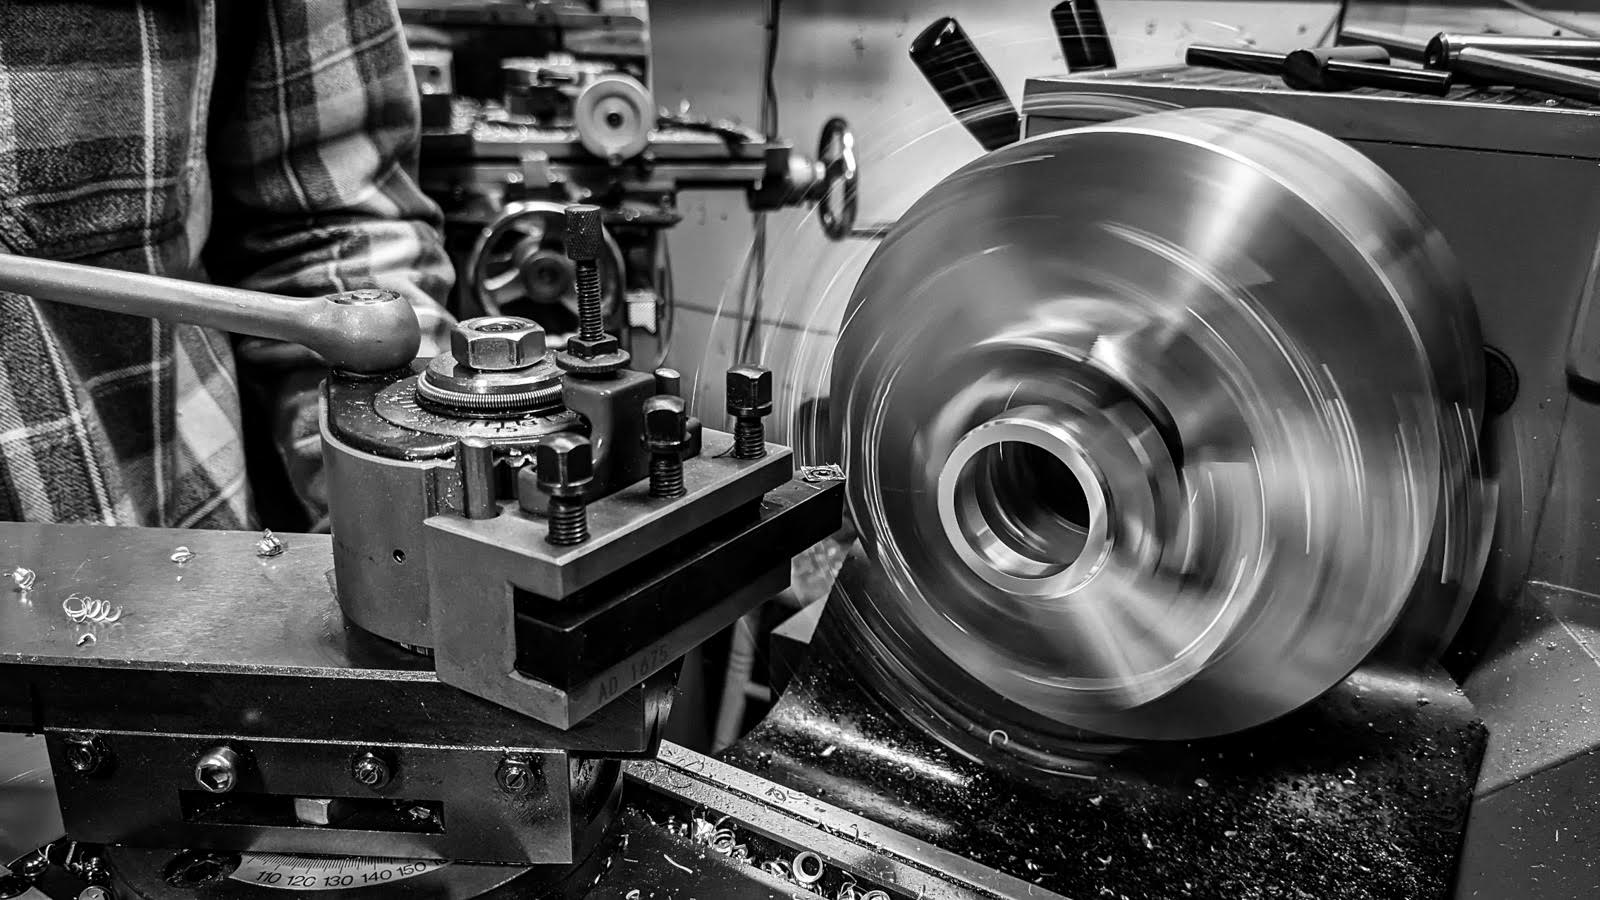 Pinner Machine Shop on Self-Taught Machining, Making Parts in a Kitchen, & More (Ep.136)Pinner Machine Shop on Self-Taught Machining, Making Parts in a Kitchen, & More (Ep.136)